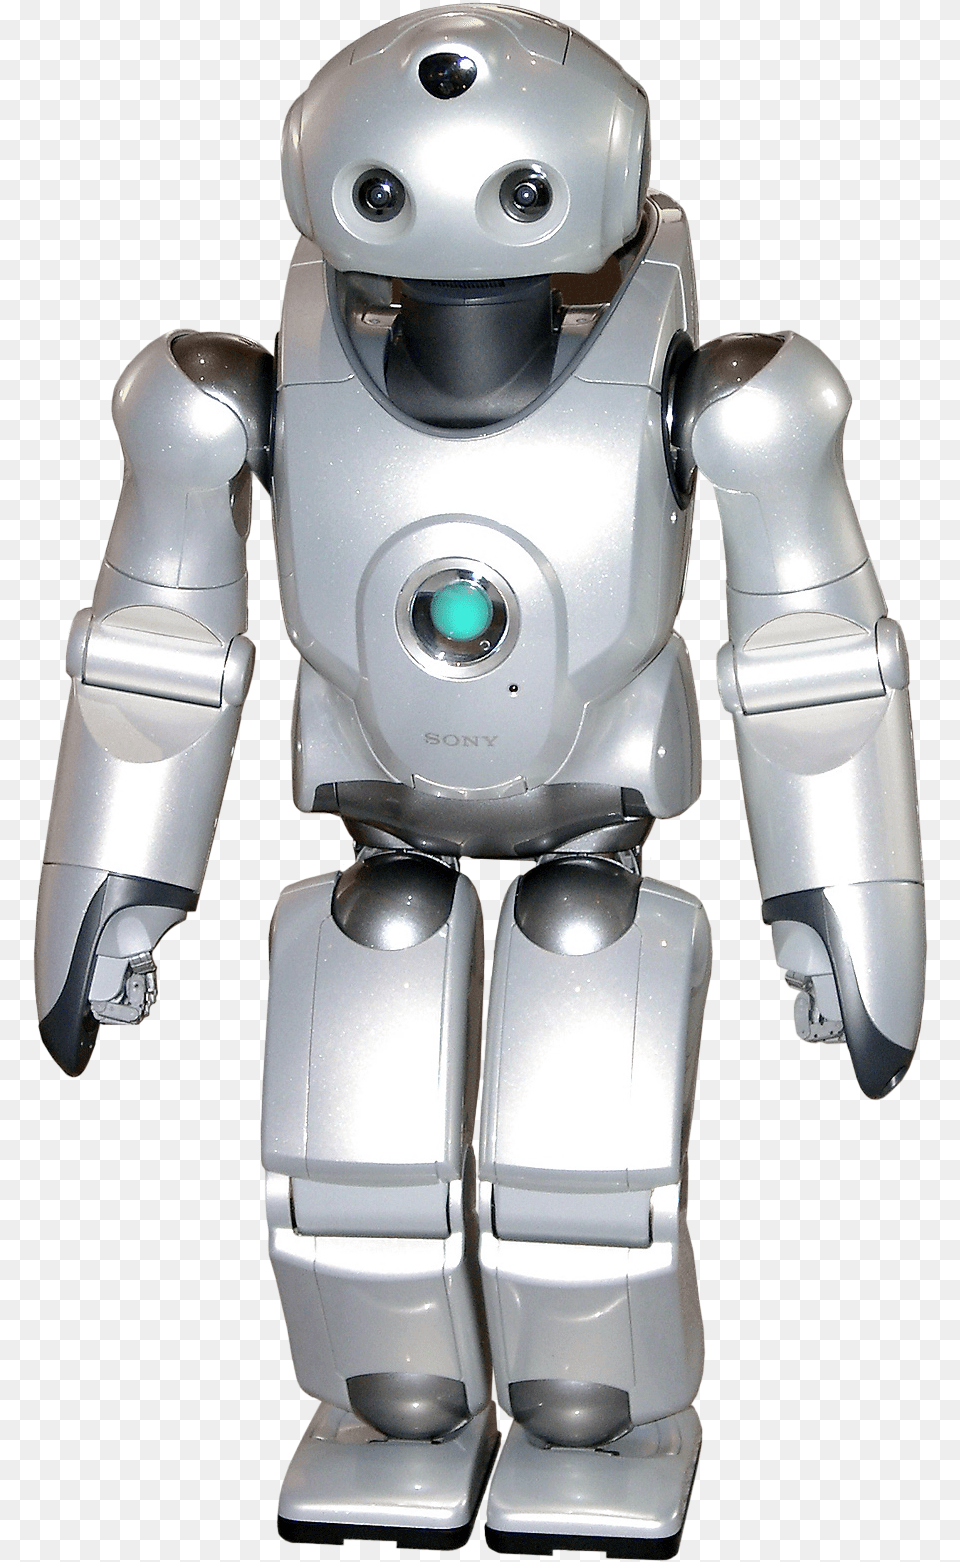 File Sony Qrio Robot Wikimedia Commons Qrio, Toy Free Png